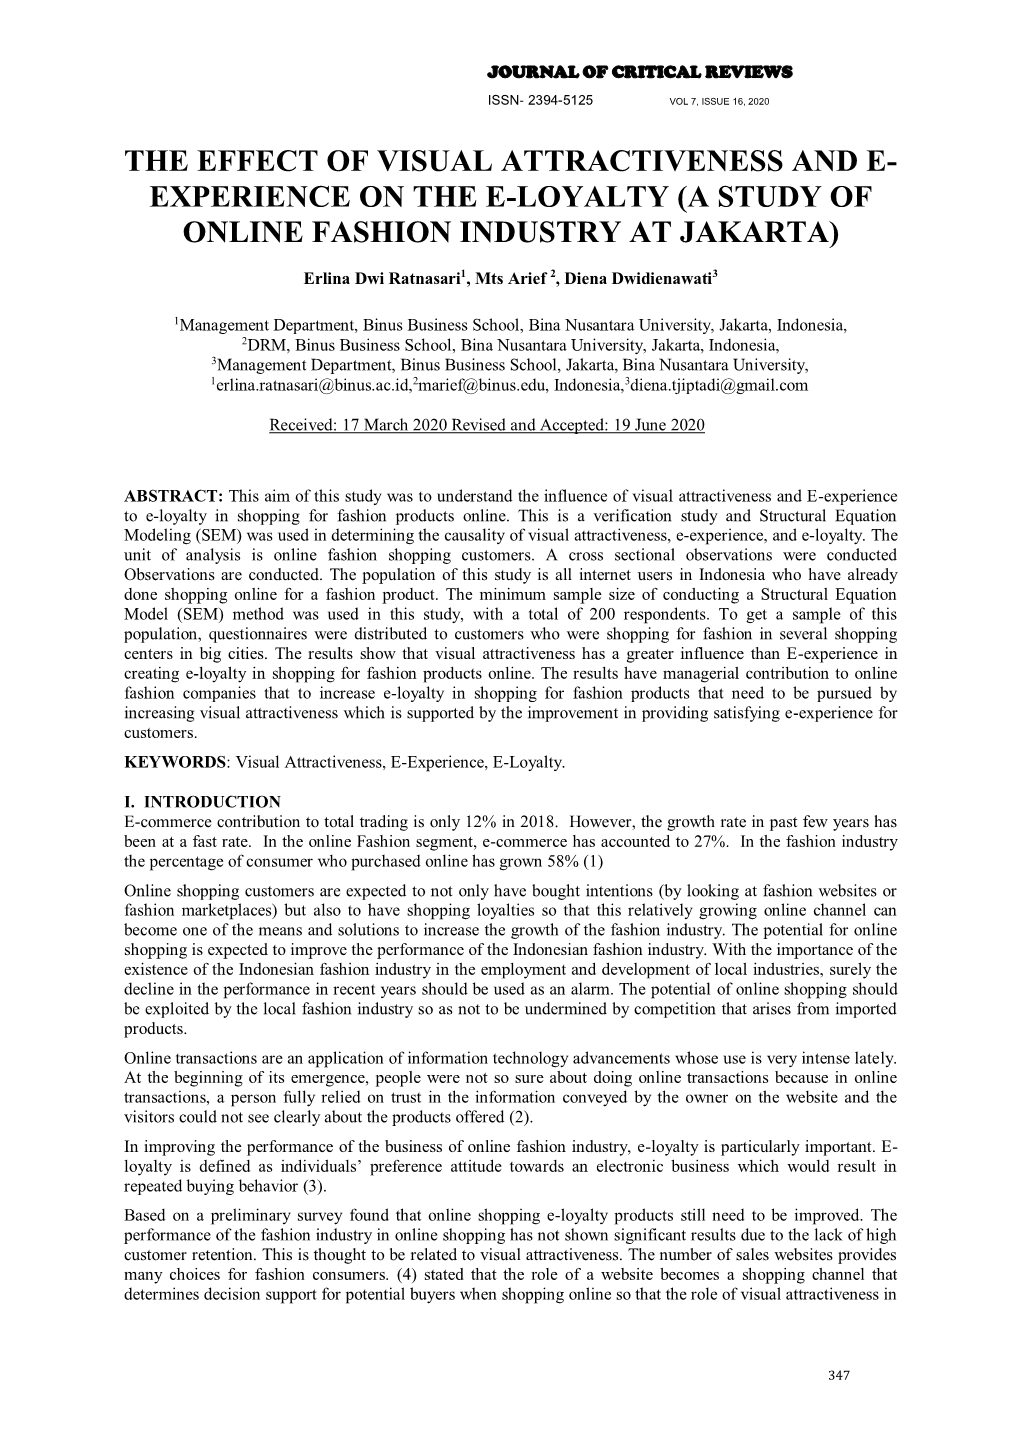 The Effect of Visual Attractiveness and E- Experience on the E-Loyalty (A Study of Online Fashion Industry at Jakarta)